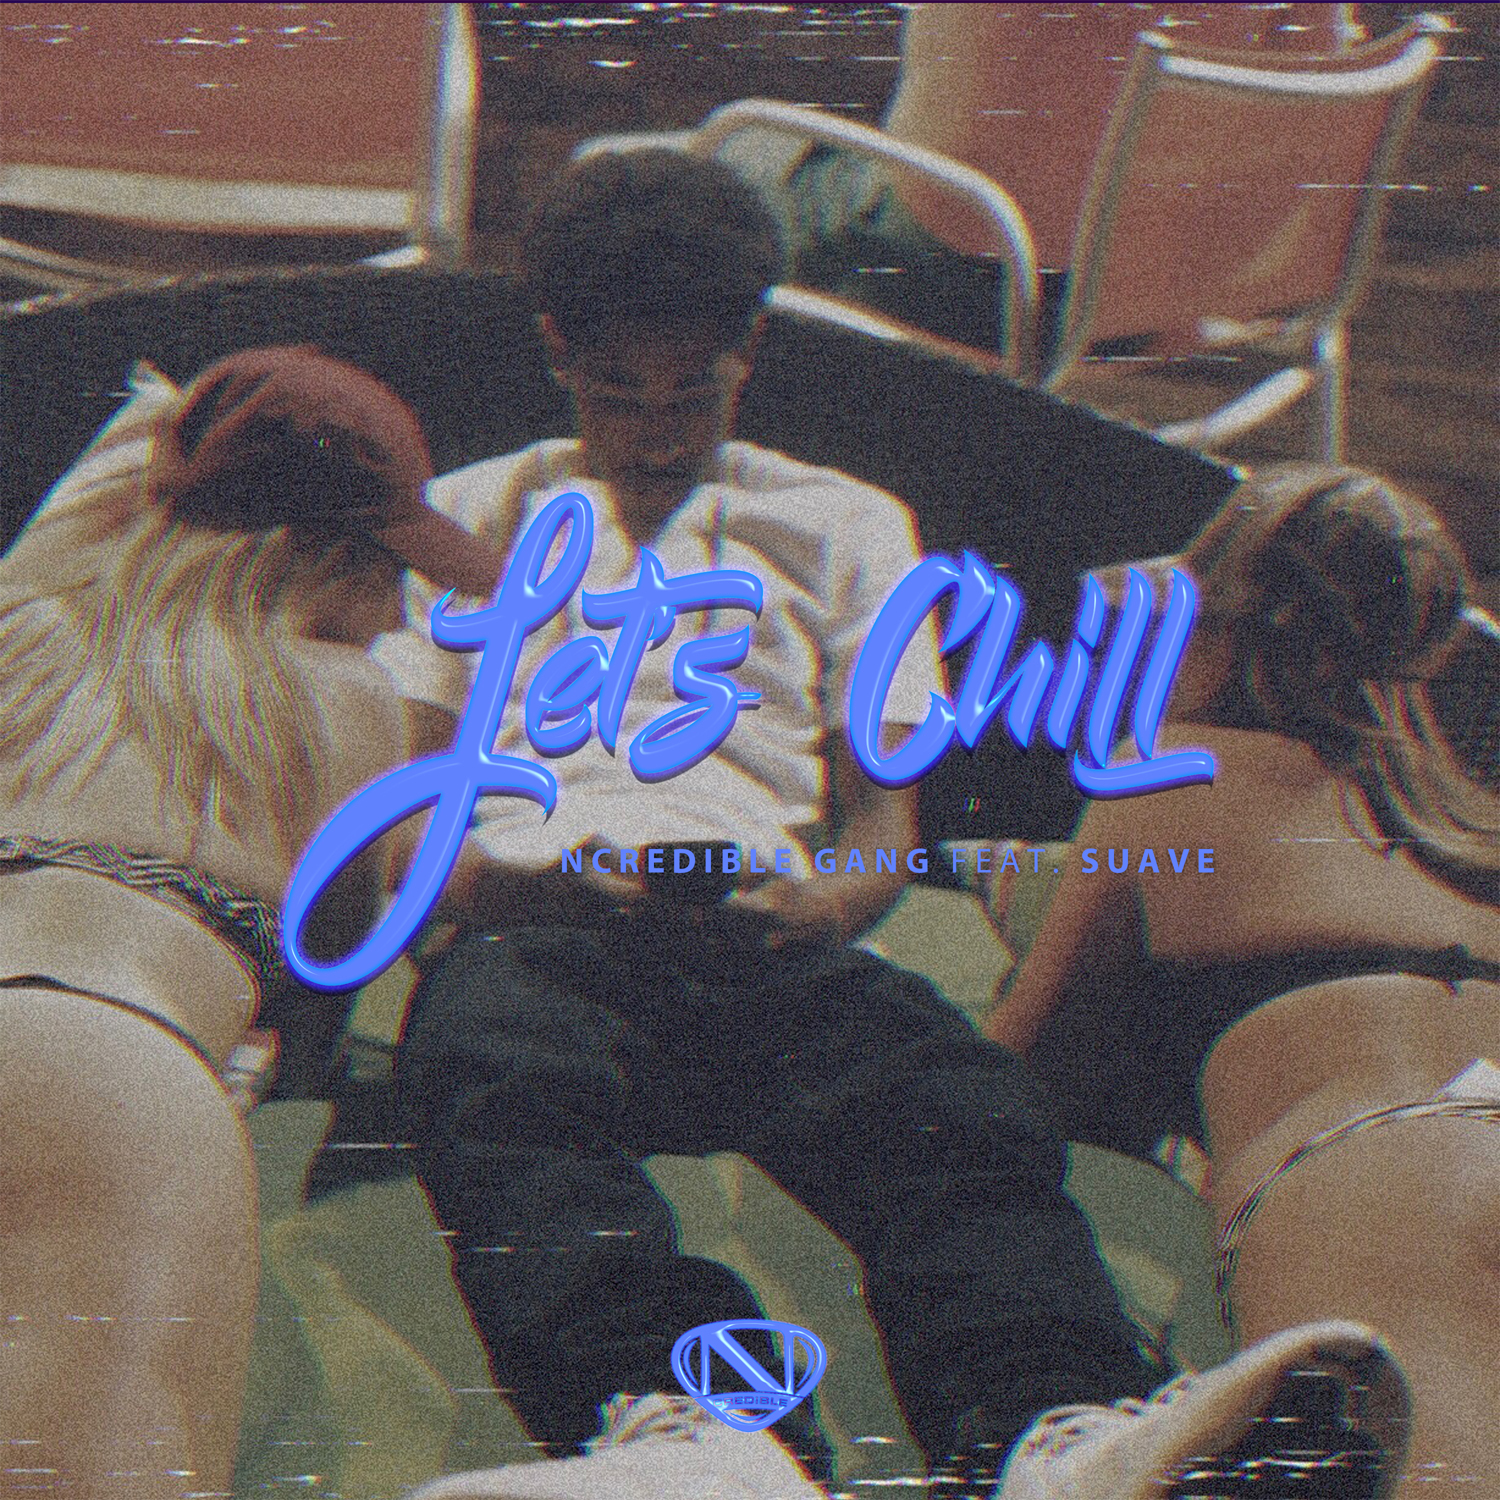 Get “Let’s Chill” by Suave on Apple Music!